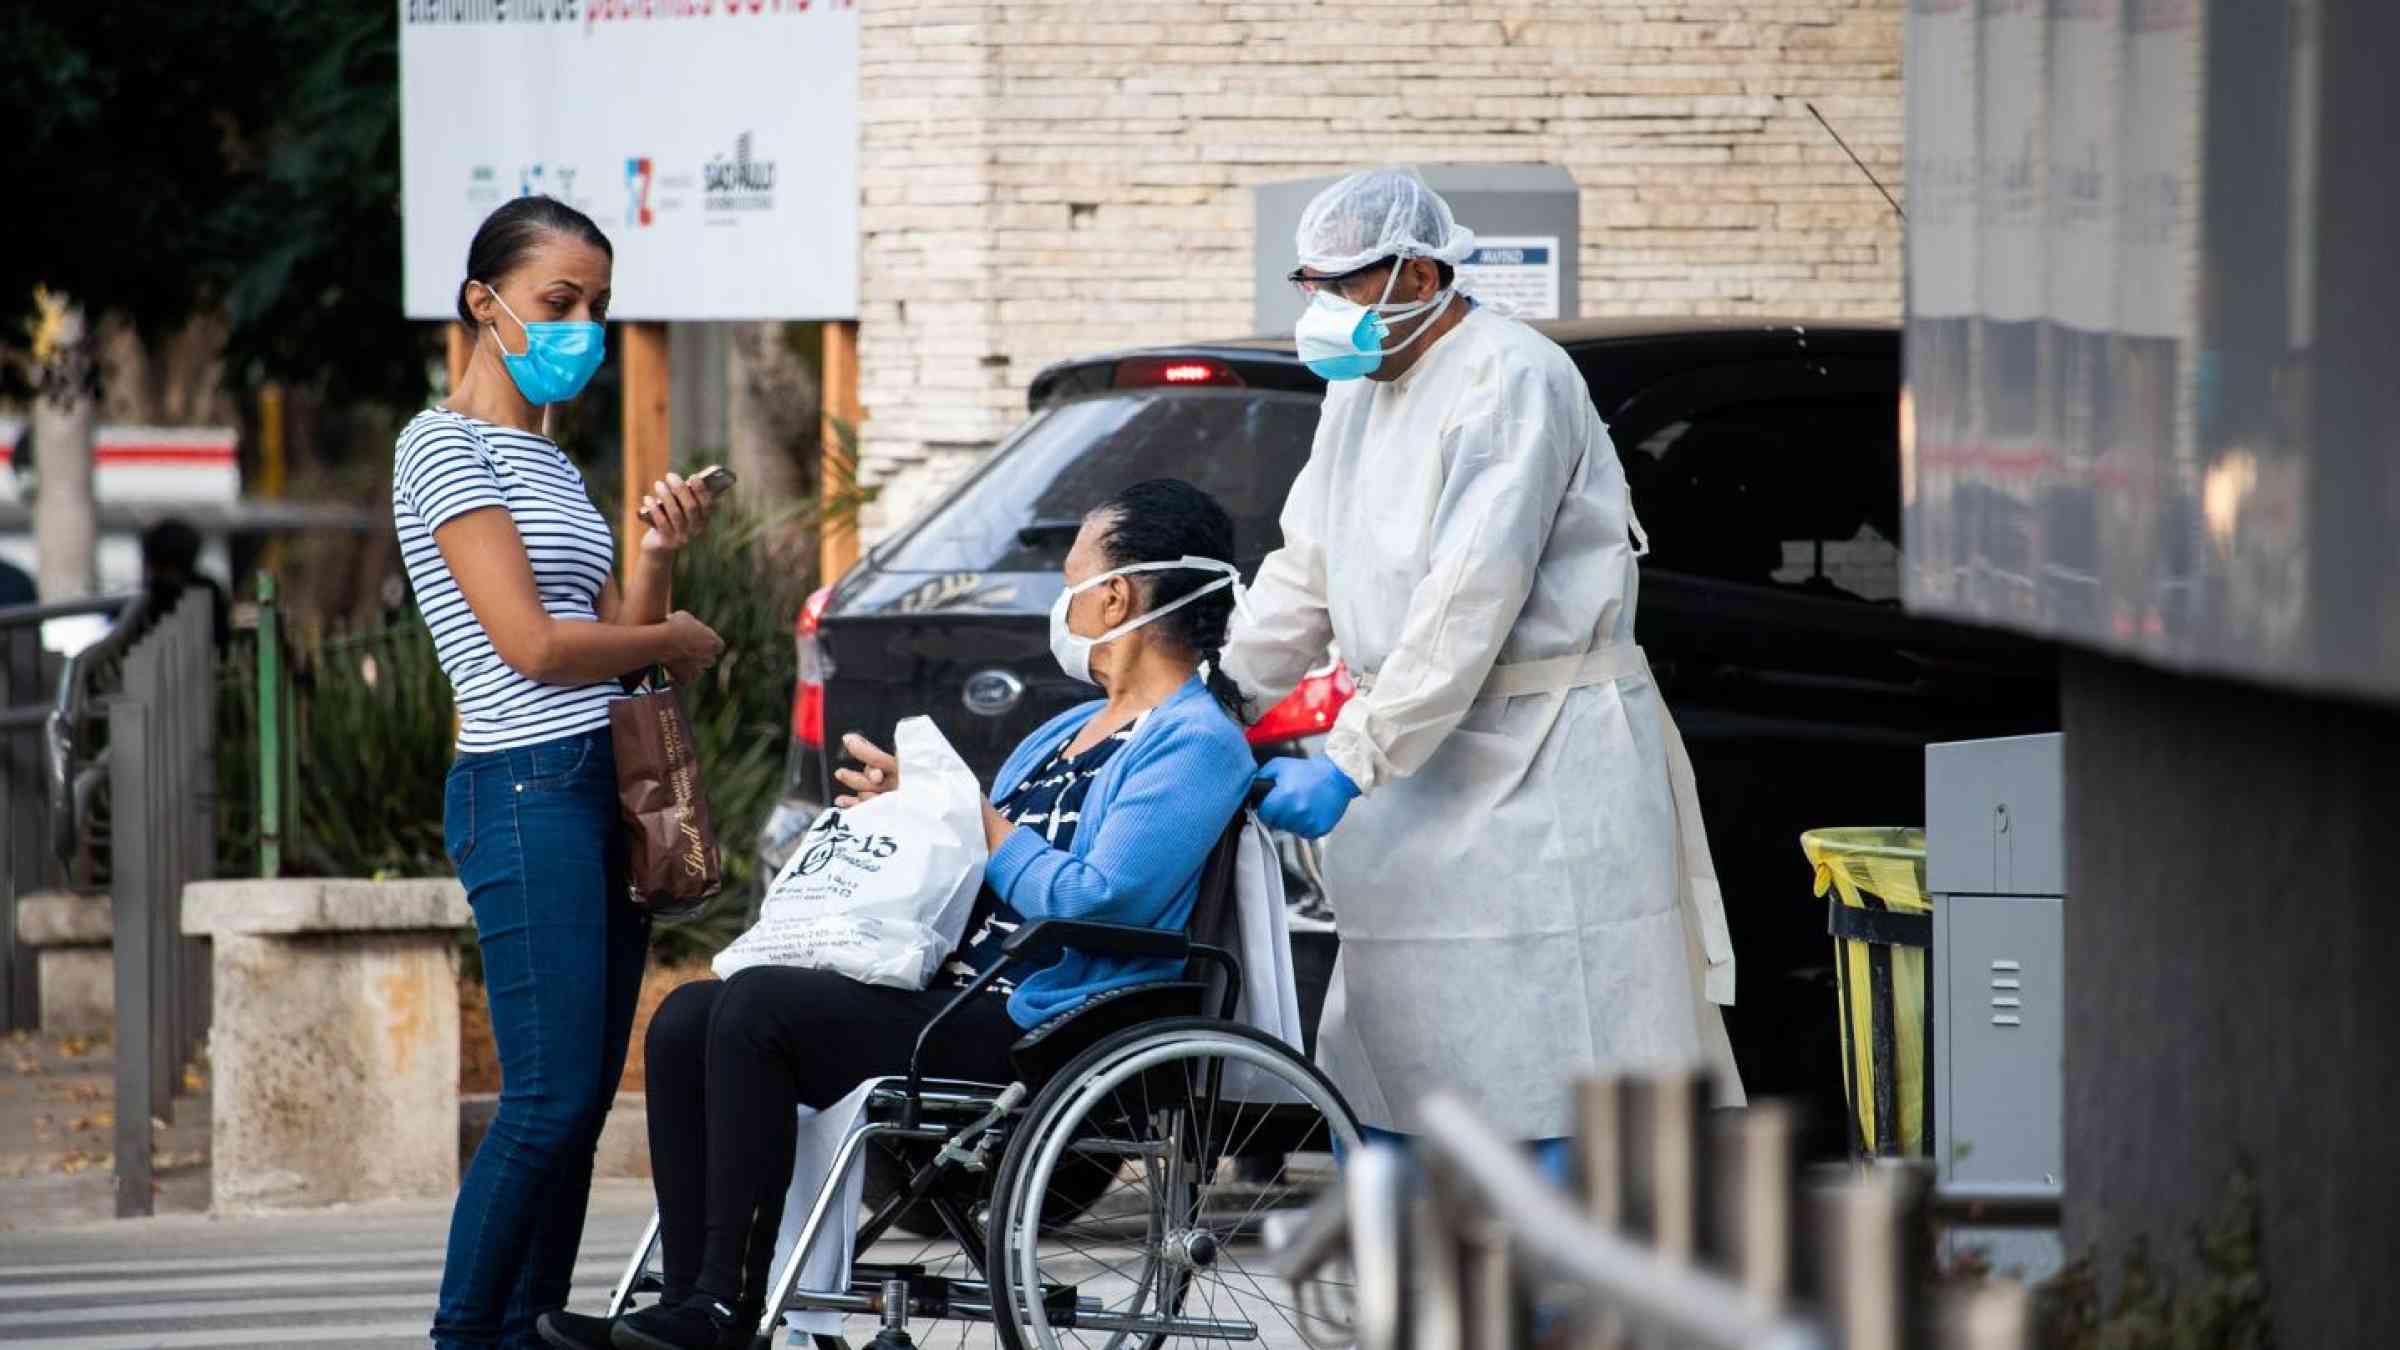 Picture of three people, a patient in a wheelchair, a doctor and one more person exiting a hospital.